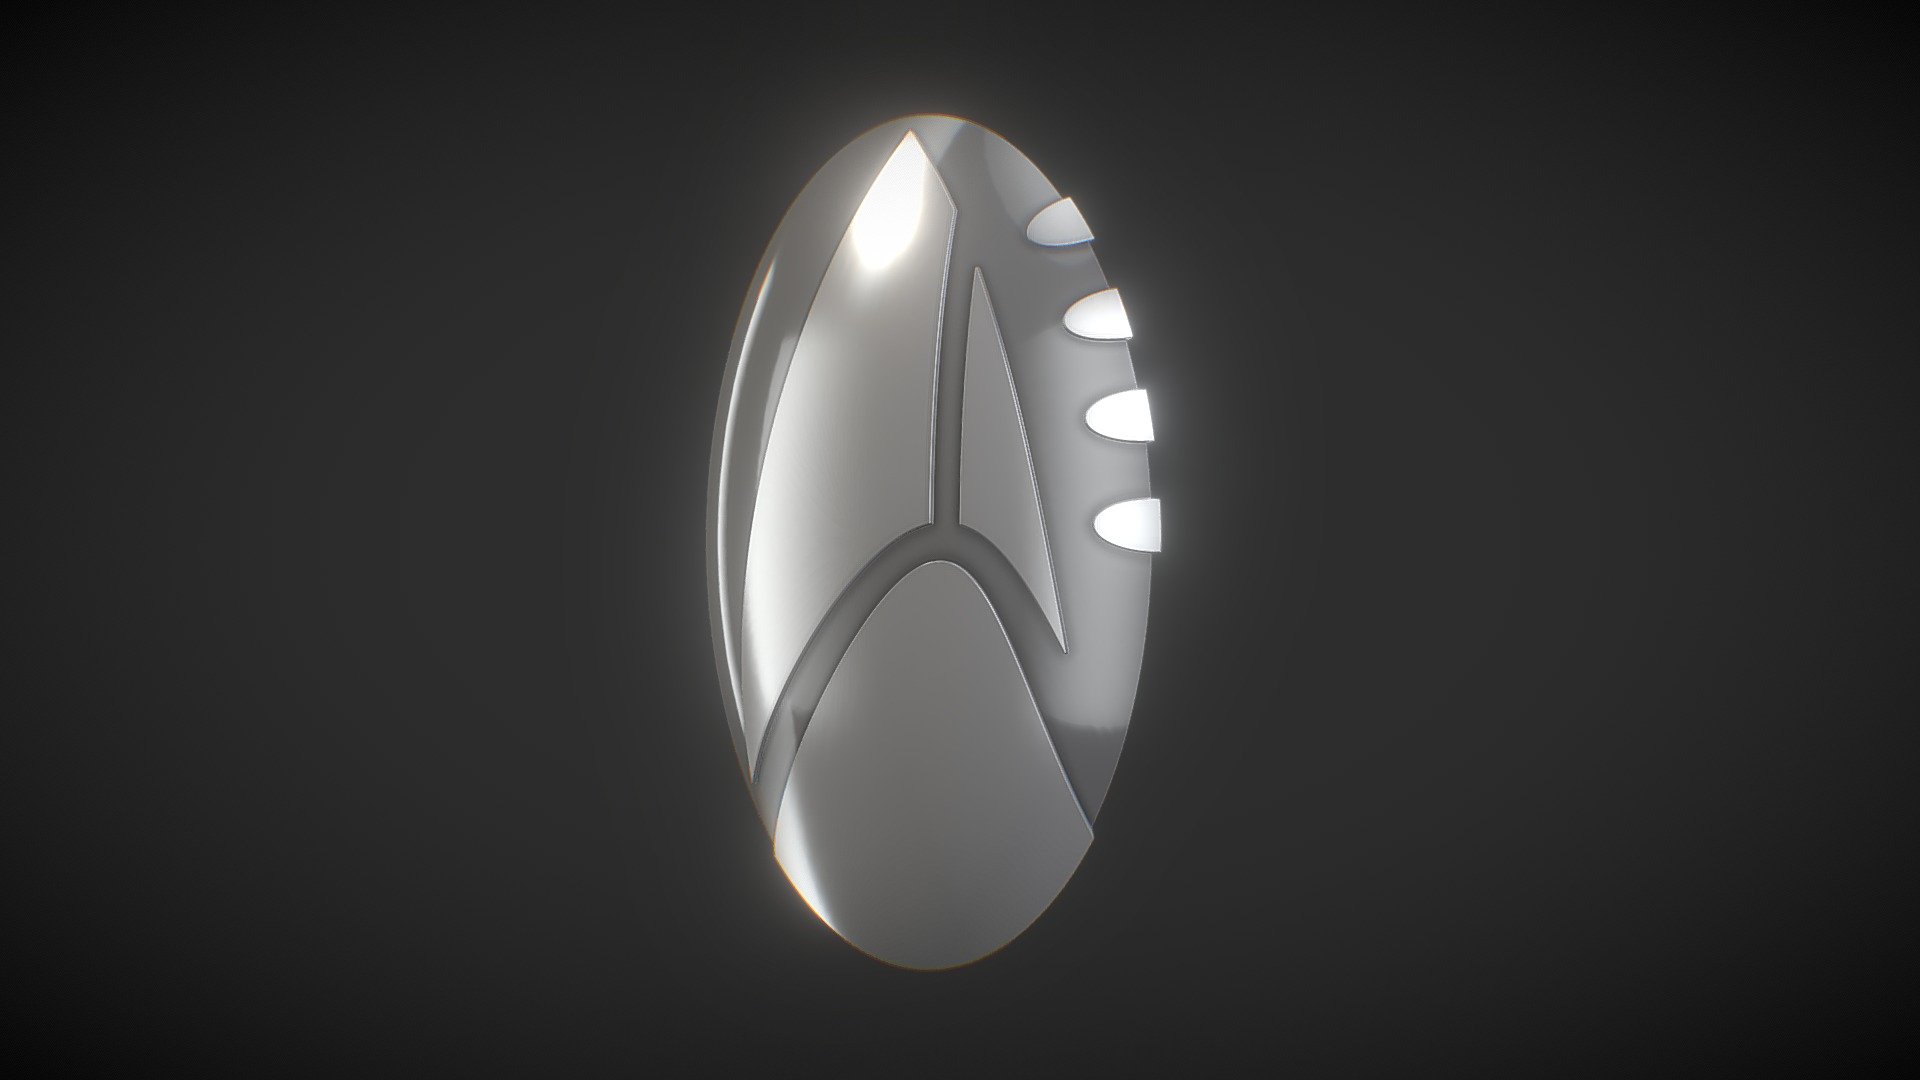 The new Star Trek Discovery season 3 badge!
Available to download in the Sketchfab store as well! - Star Trek Discovery Season 3 badge - Buy Royalty Free 3D model by martinhajek 3d model